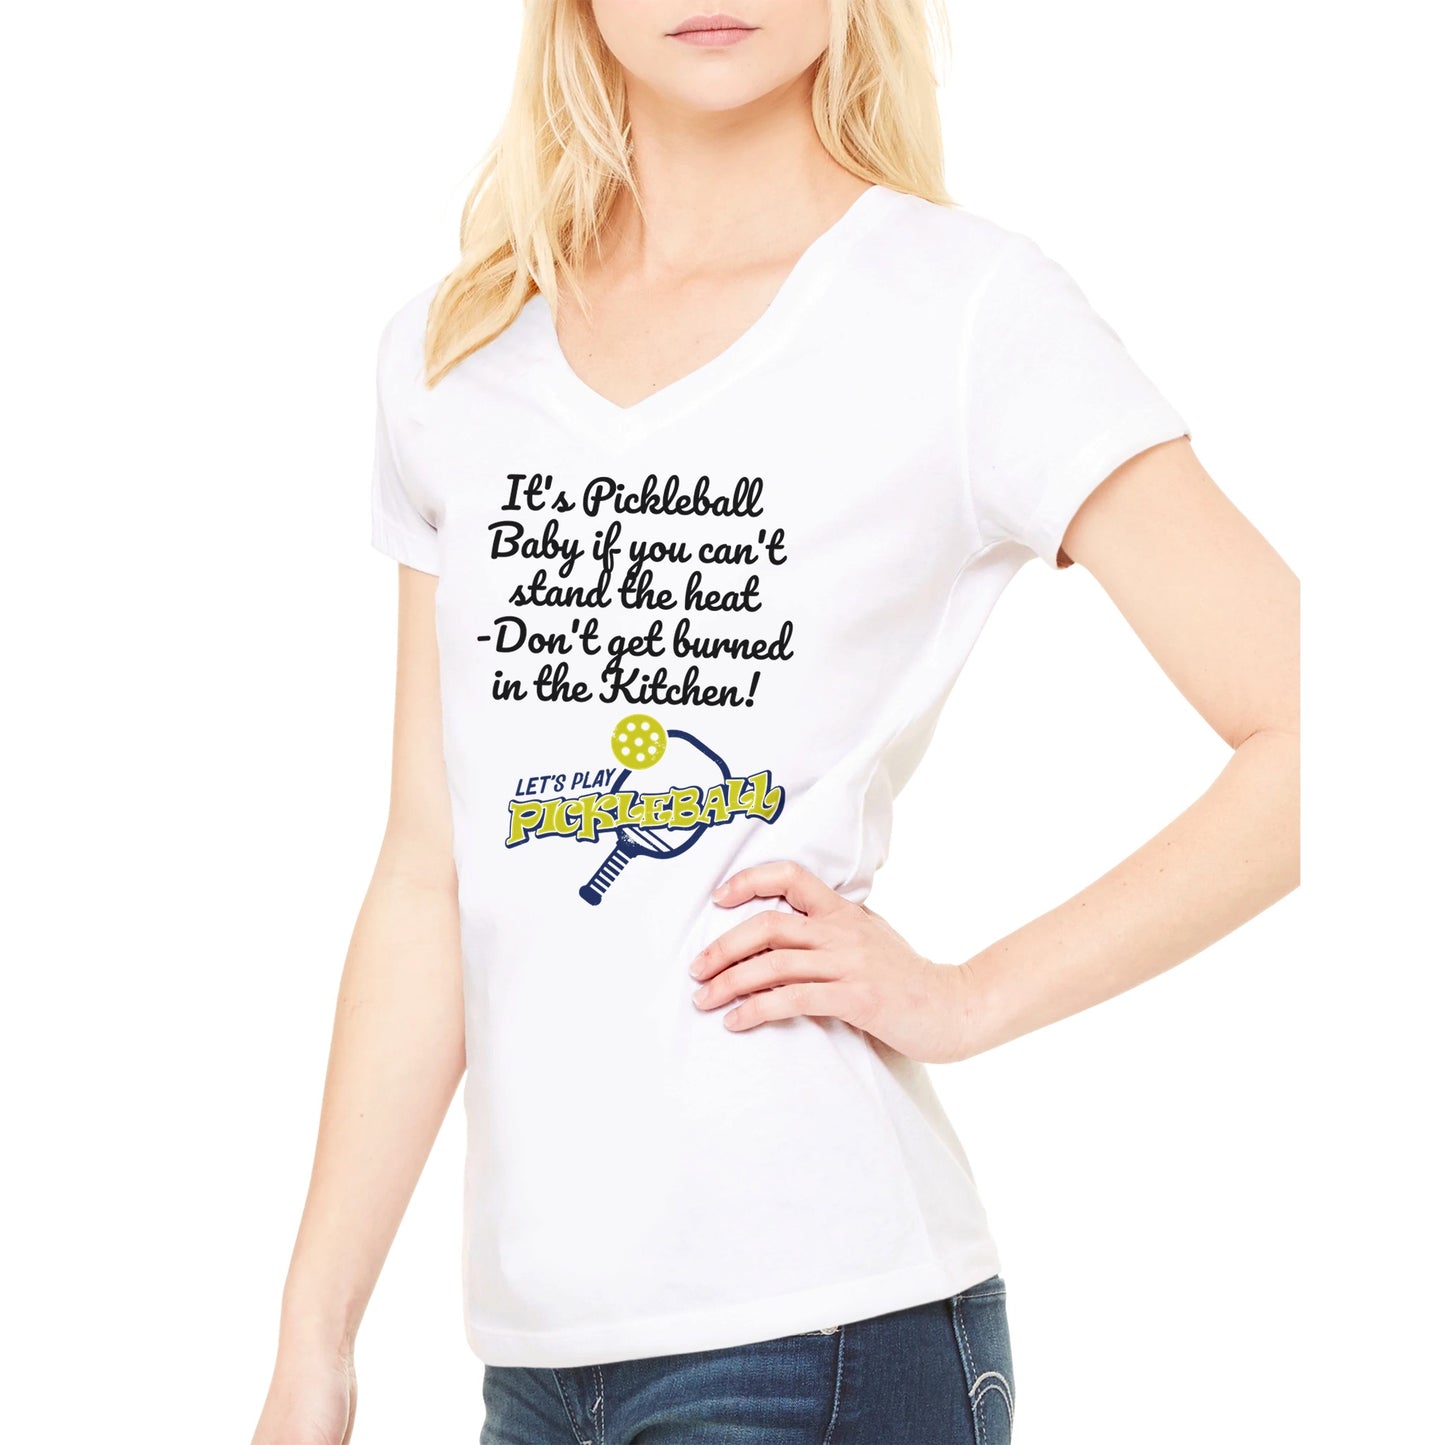 Blonde hair Female model wearing premium women’s V-neck t-shirt with original logo It's PIckleball Baby if you can't stand the heat - Don't get burned in the Kitchen and Let's Play PickleBall on front from WhatYa Say Apparel made from combed and ring-spun cotton.